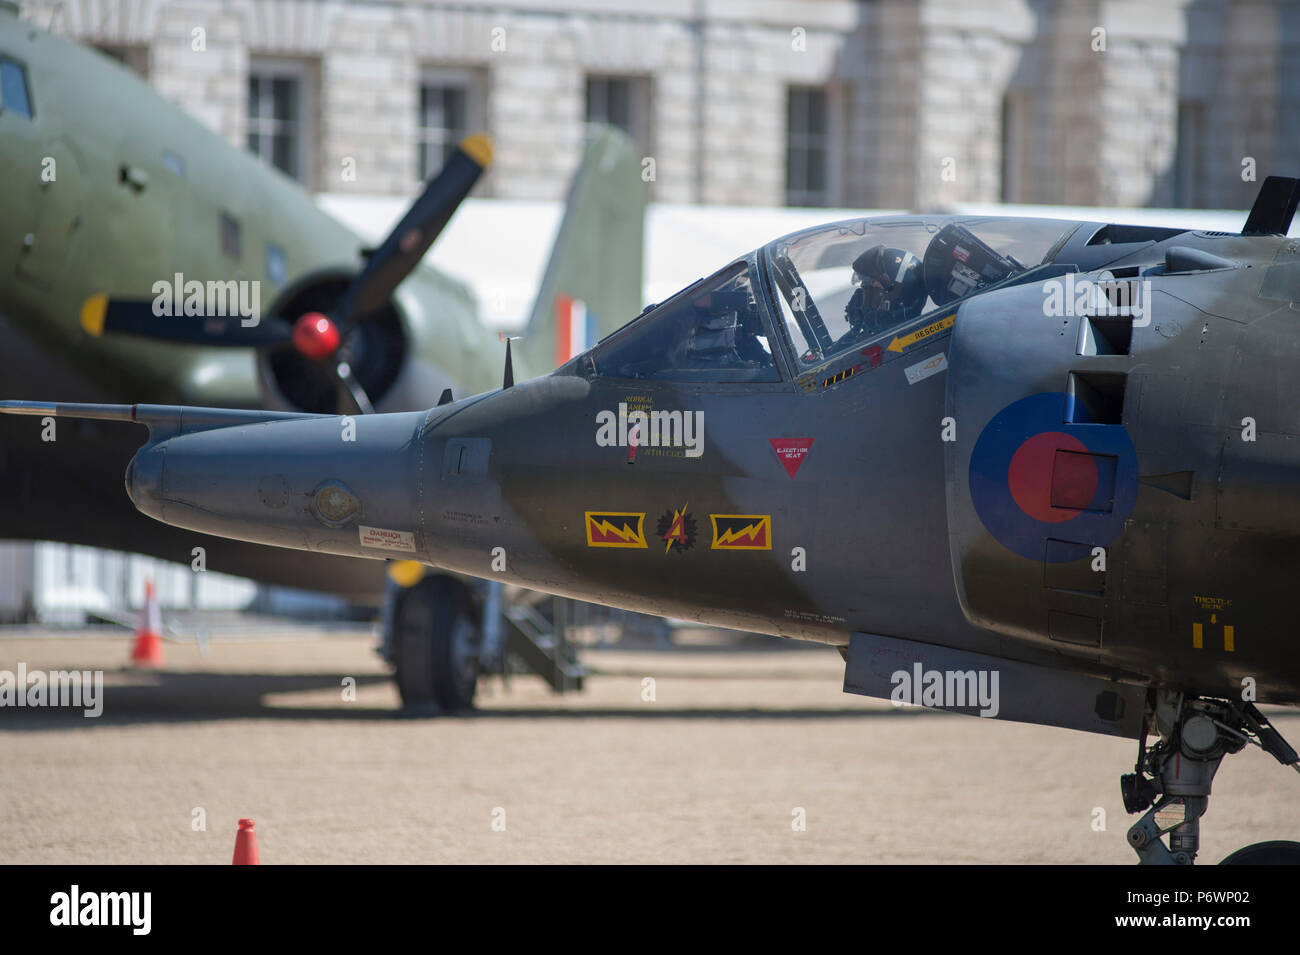 Horse Guards Parade, London, UK. 3 July, 2018. A variety of RAF aircraft from past and present, including a Harrier GR3 VTOL fighter, a Falklands War veteran, are assembled on the central London parade ground as part of the RAF100 Aircraft Tour of Britain, celebrating the centenary of the RAF. Credit: Malcolm Park/Alamy Live News. Stock Photo